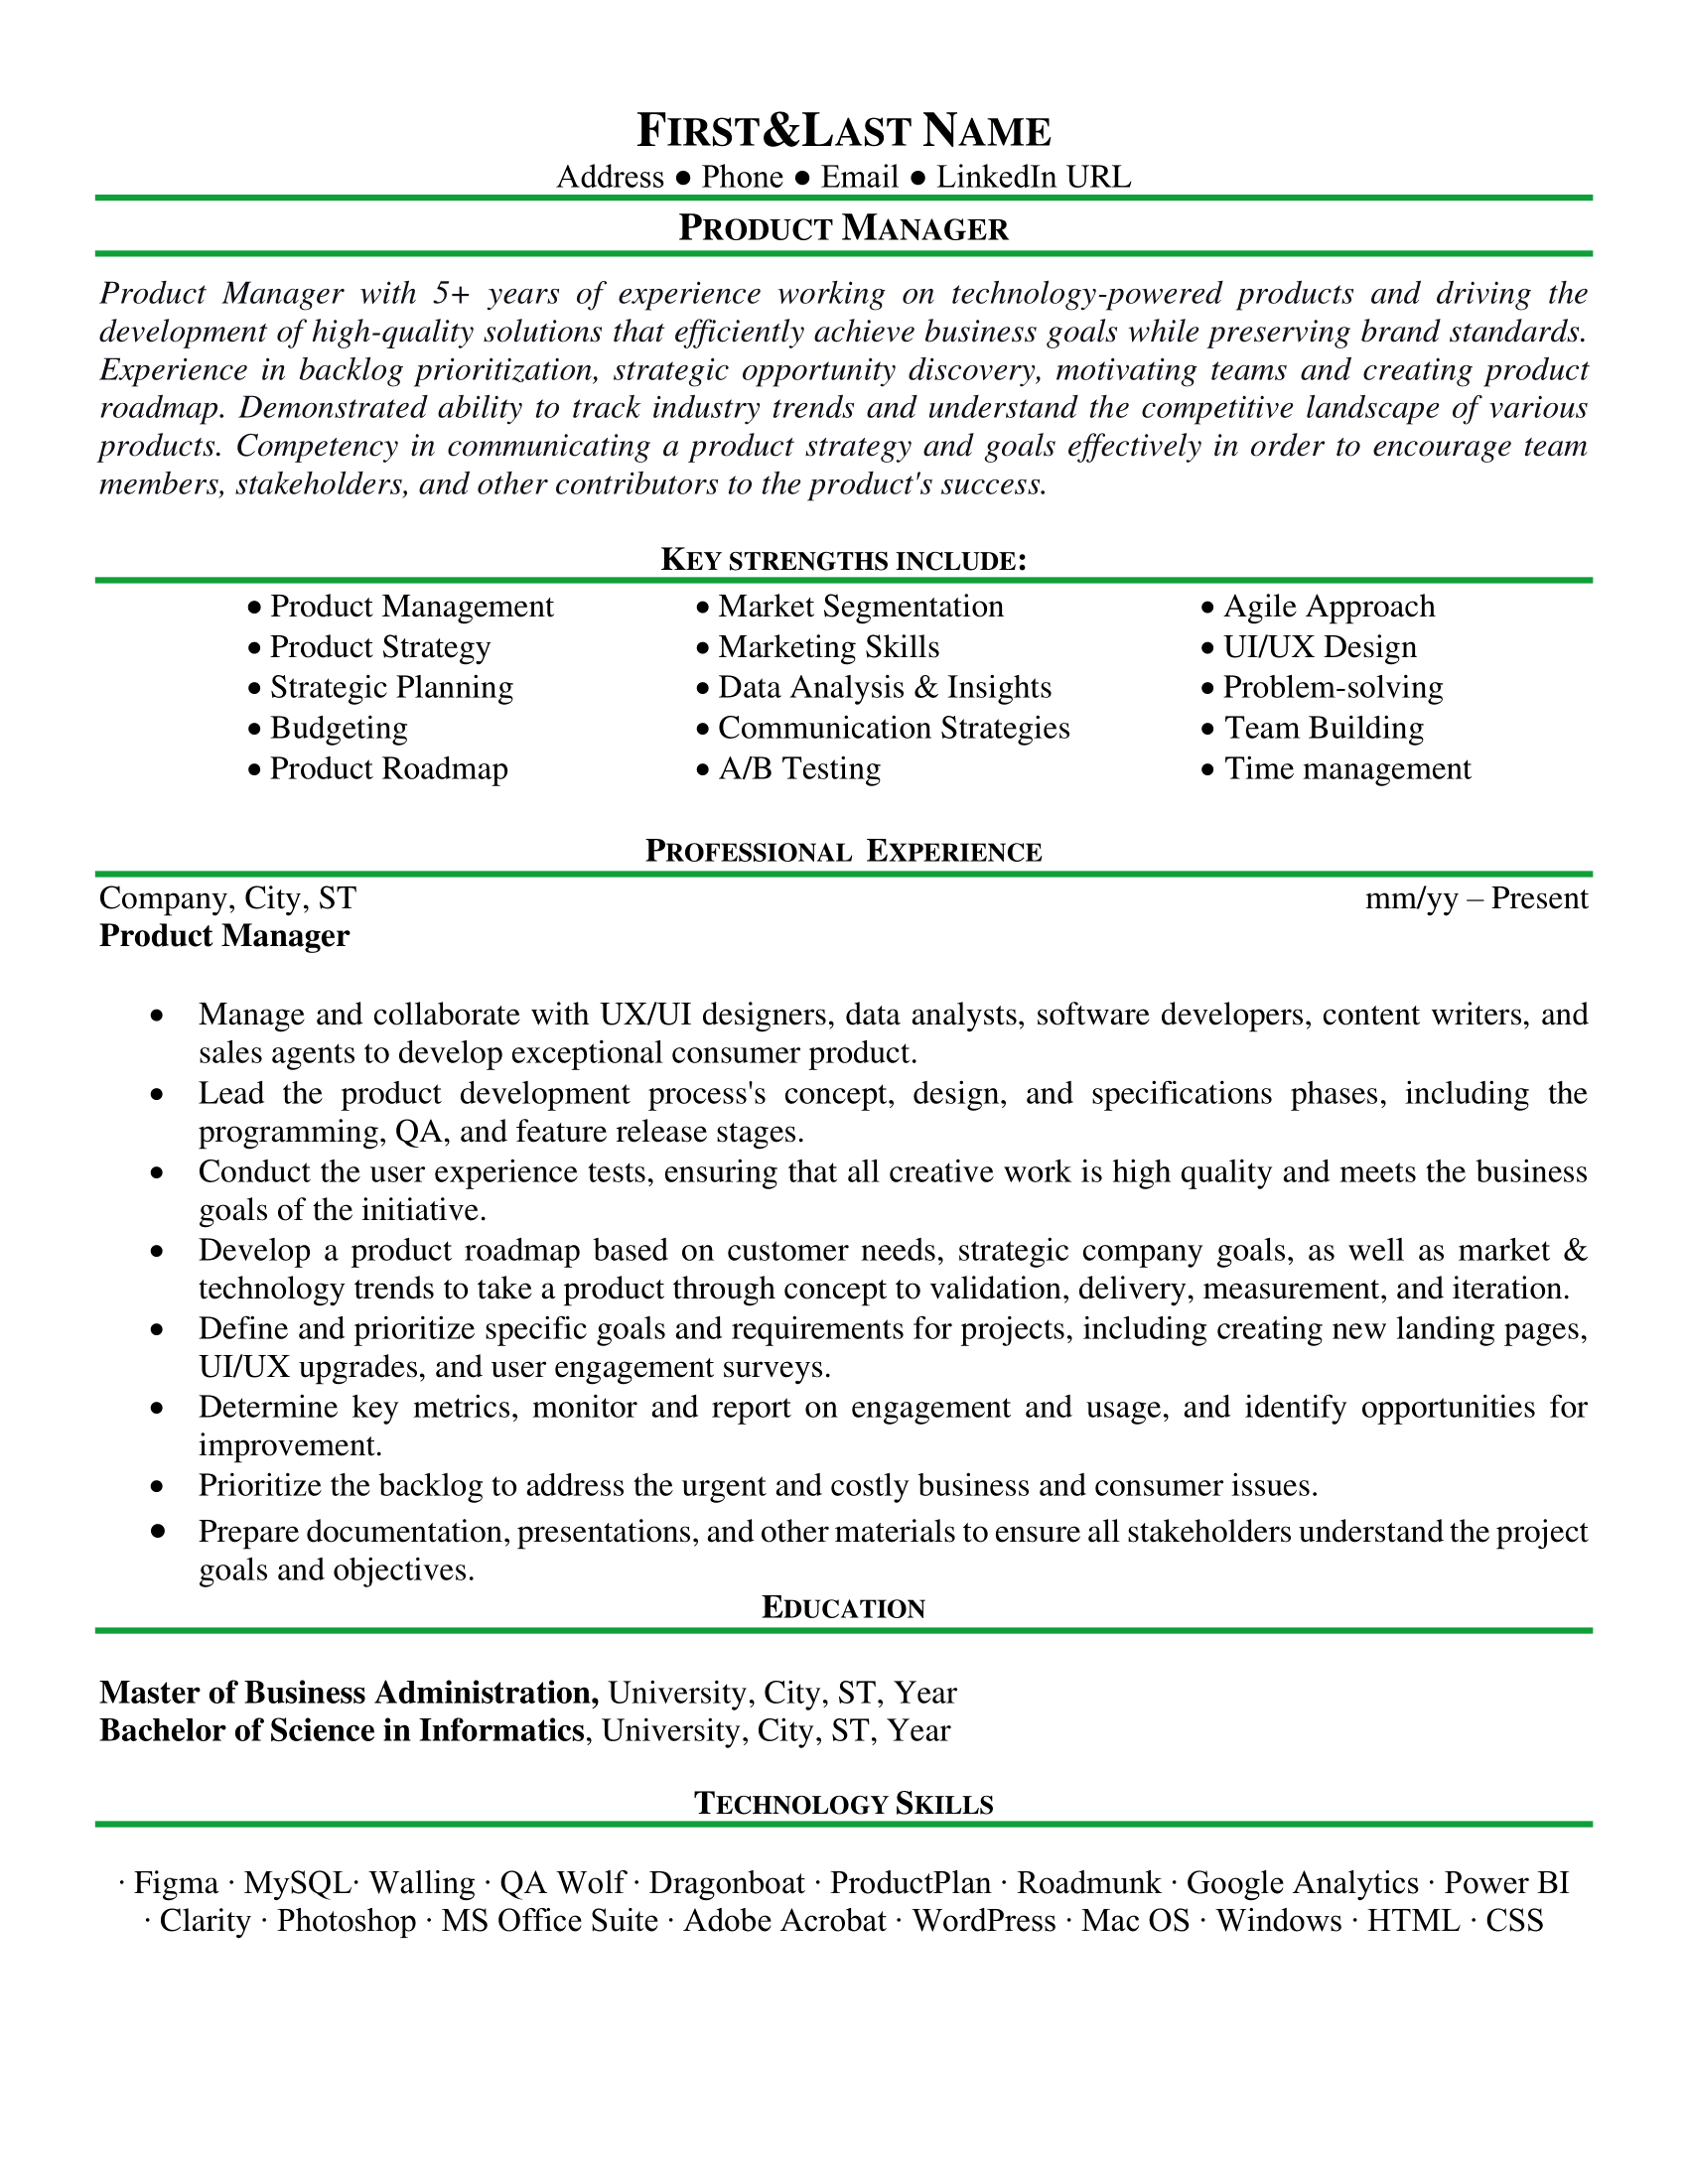 Product Manager Resume Sample